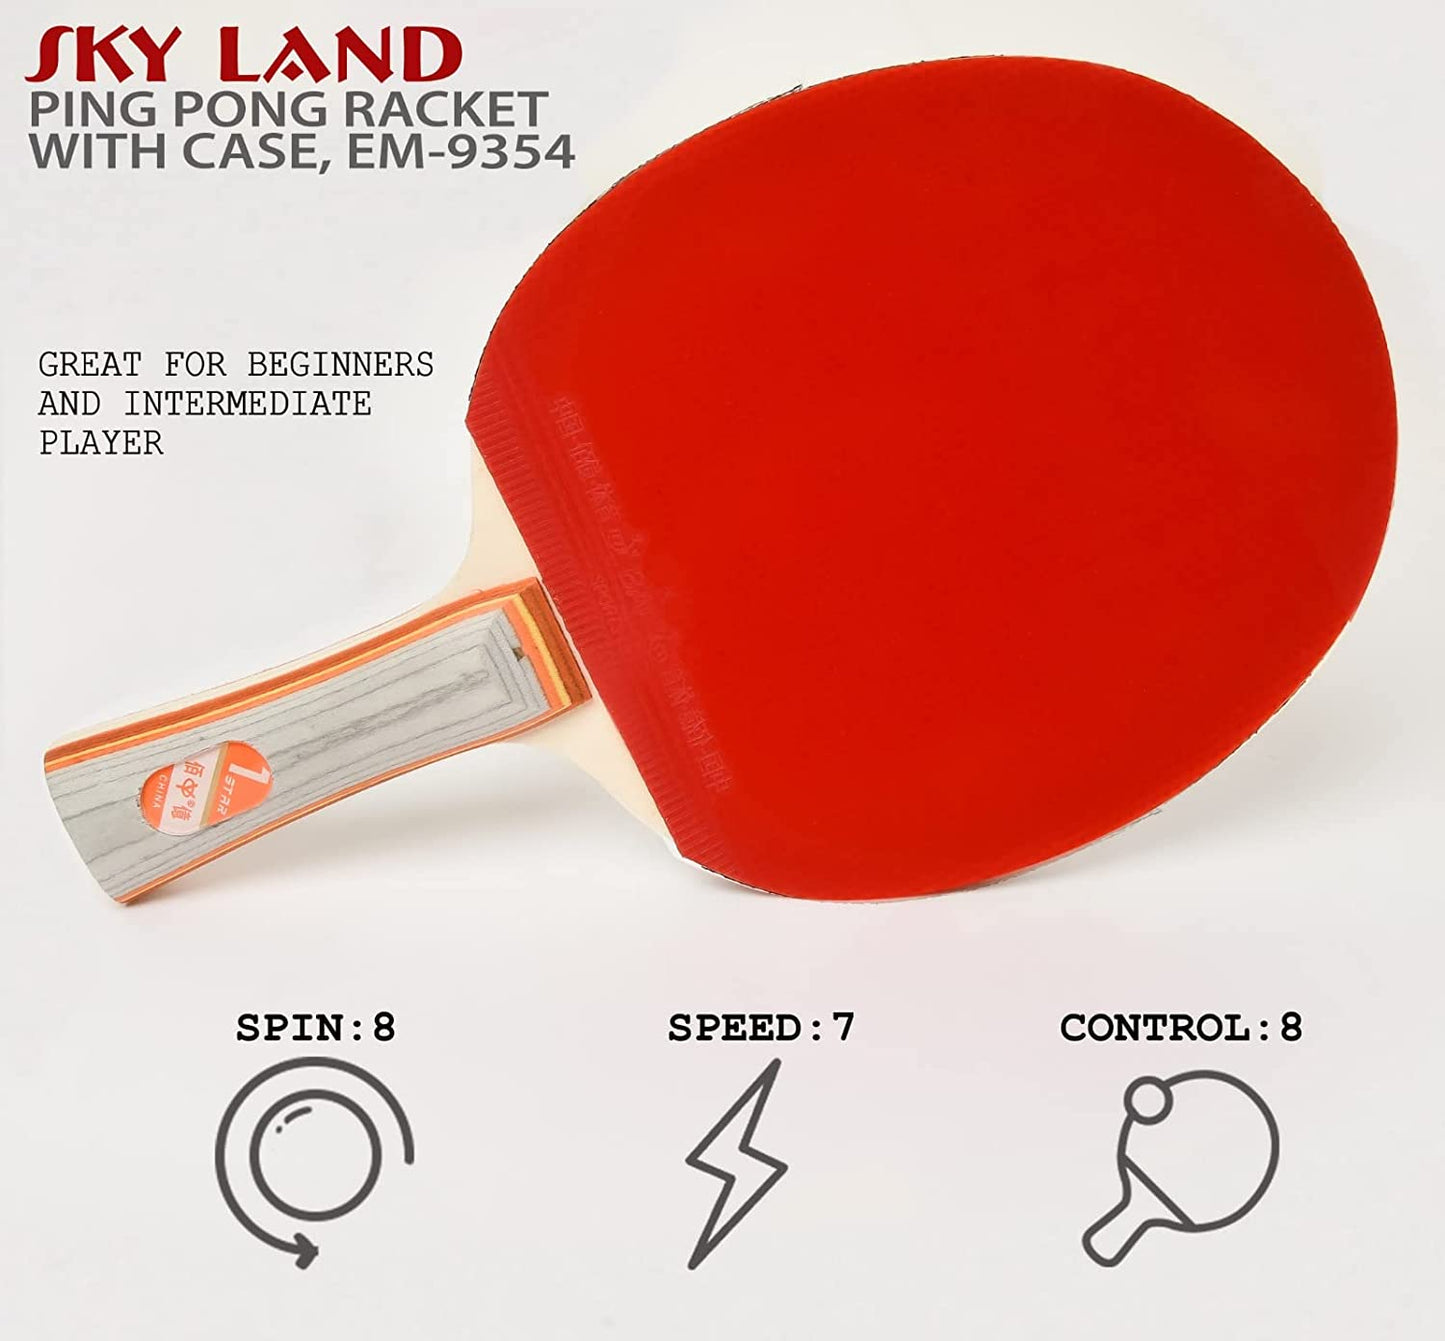 SKY LAND EM-9354 Sports Table Tennis Racket 3.0 |Ping Pong Racket & Case, Professional TT Paddle For Beginners And Intermediate Players - COOLBABY